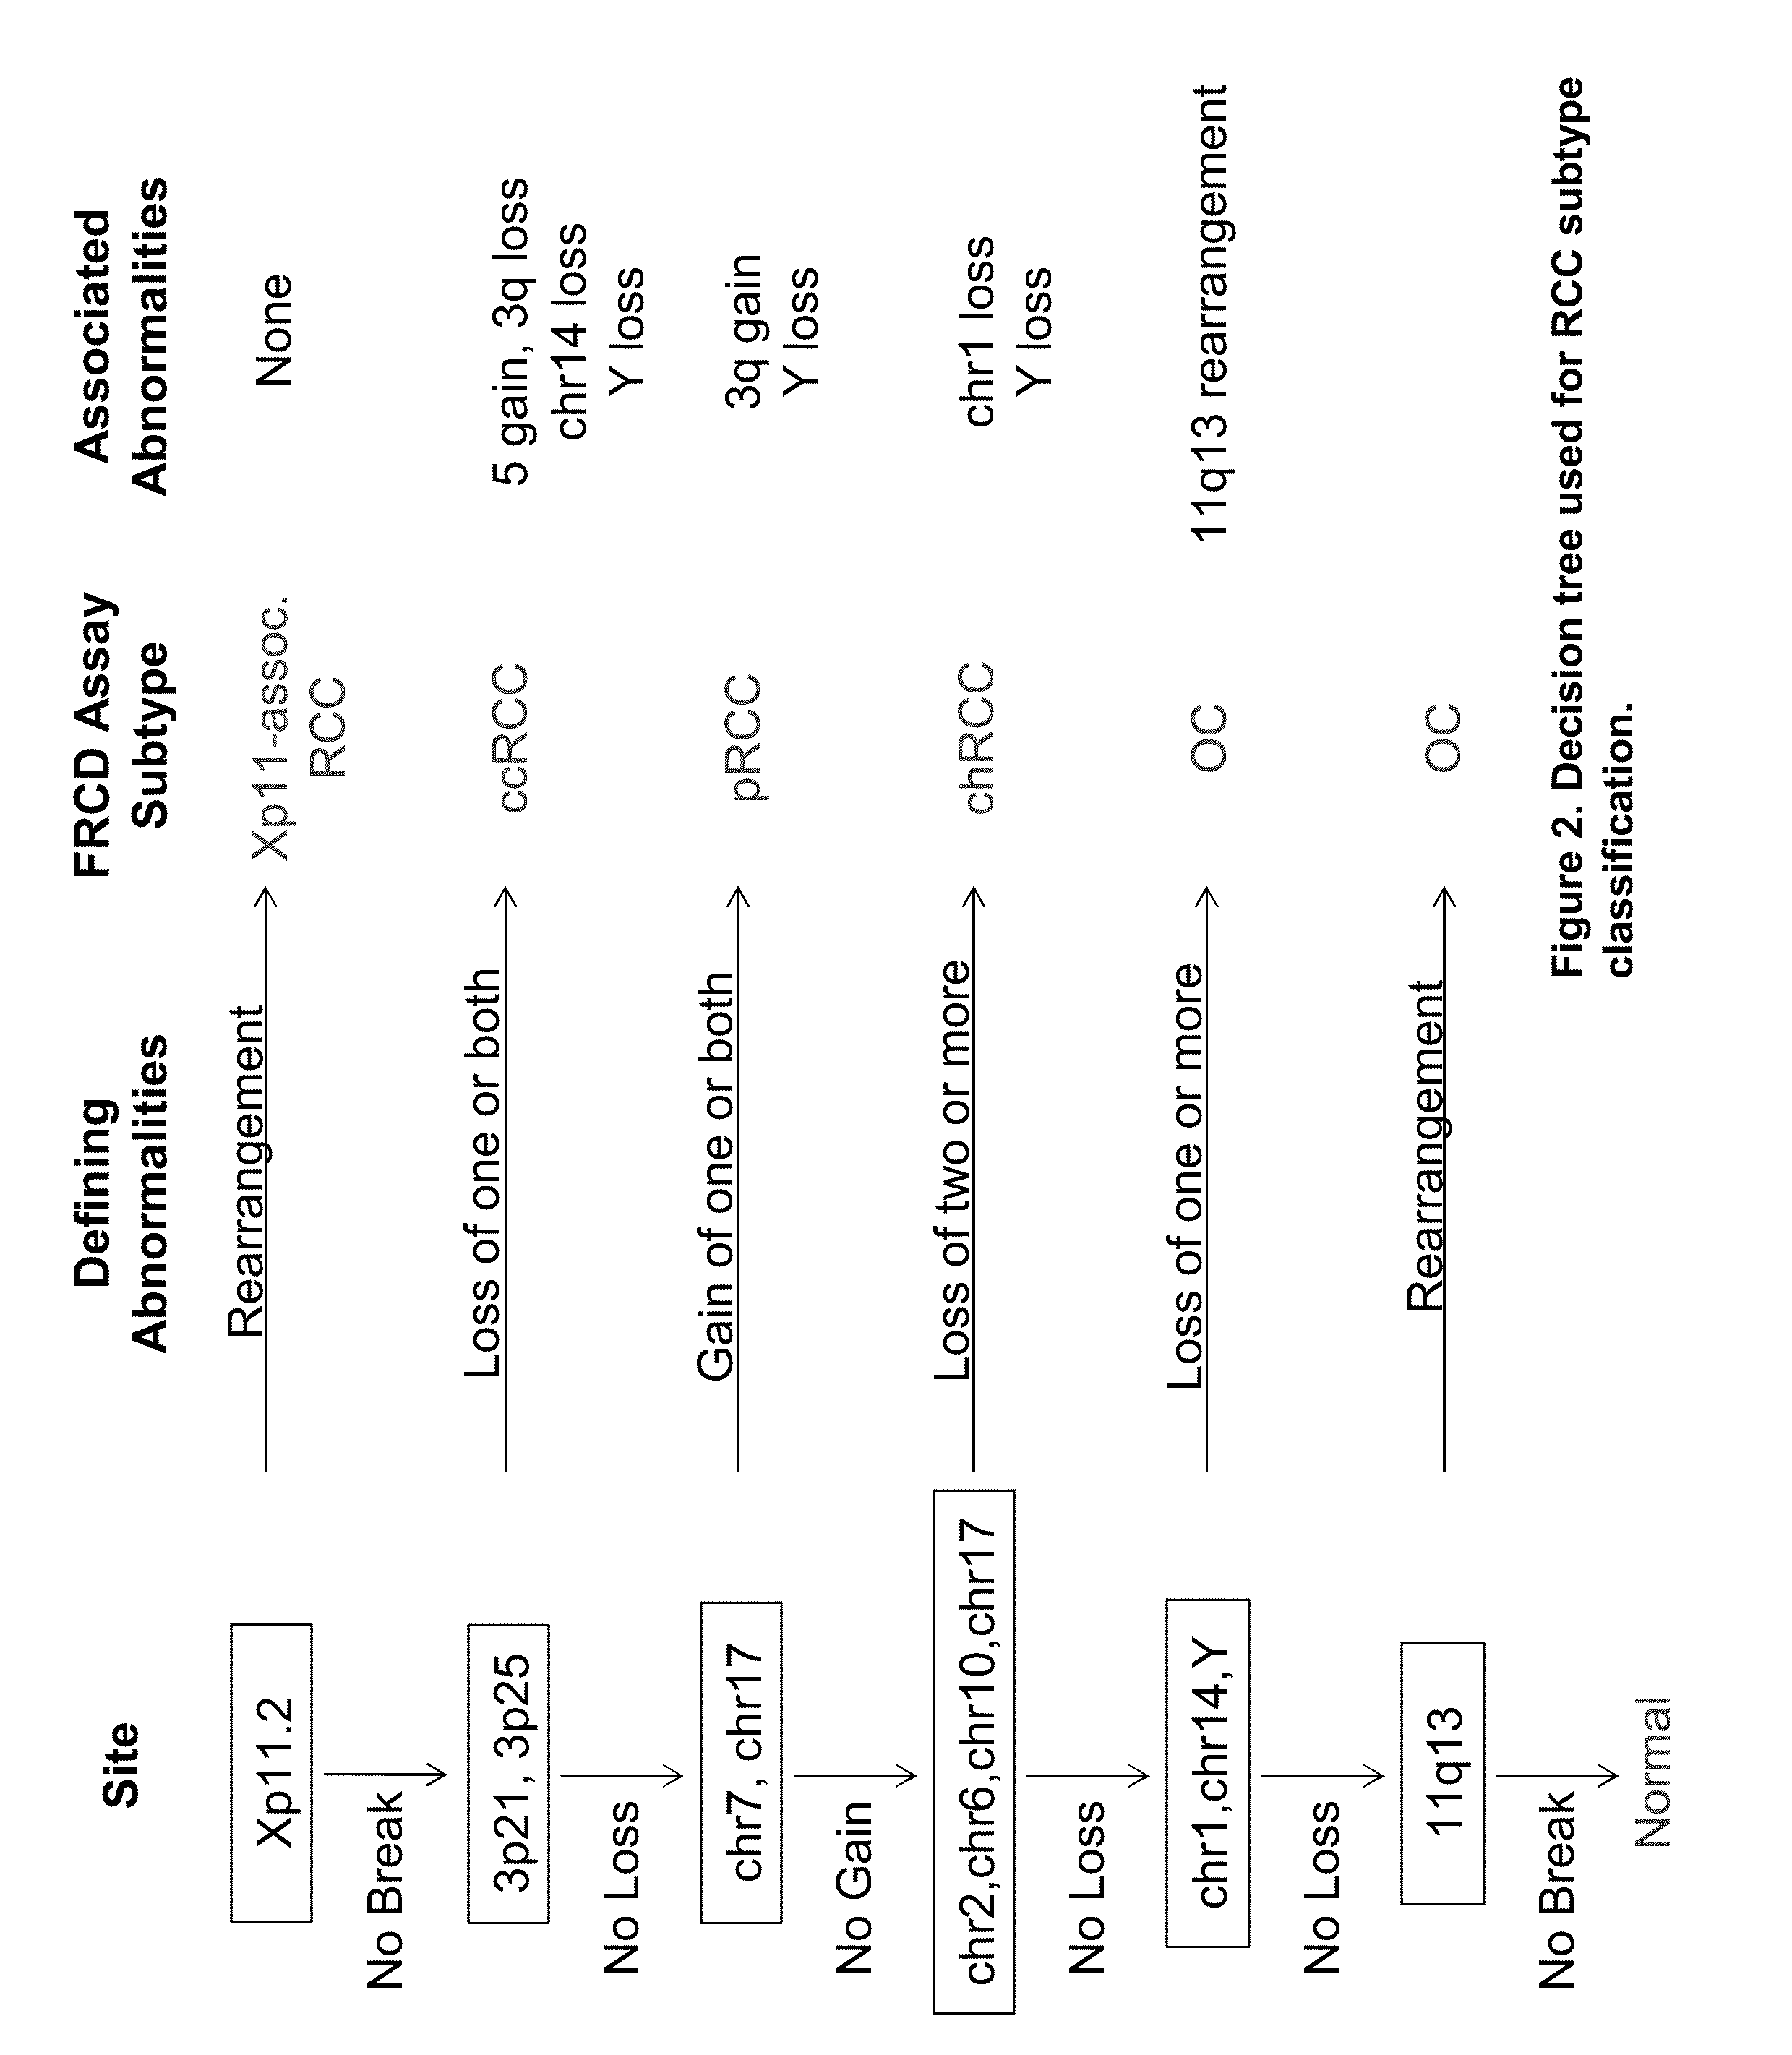 Panel for the detection and differentiation of renal cortical neoplasms